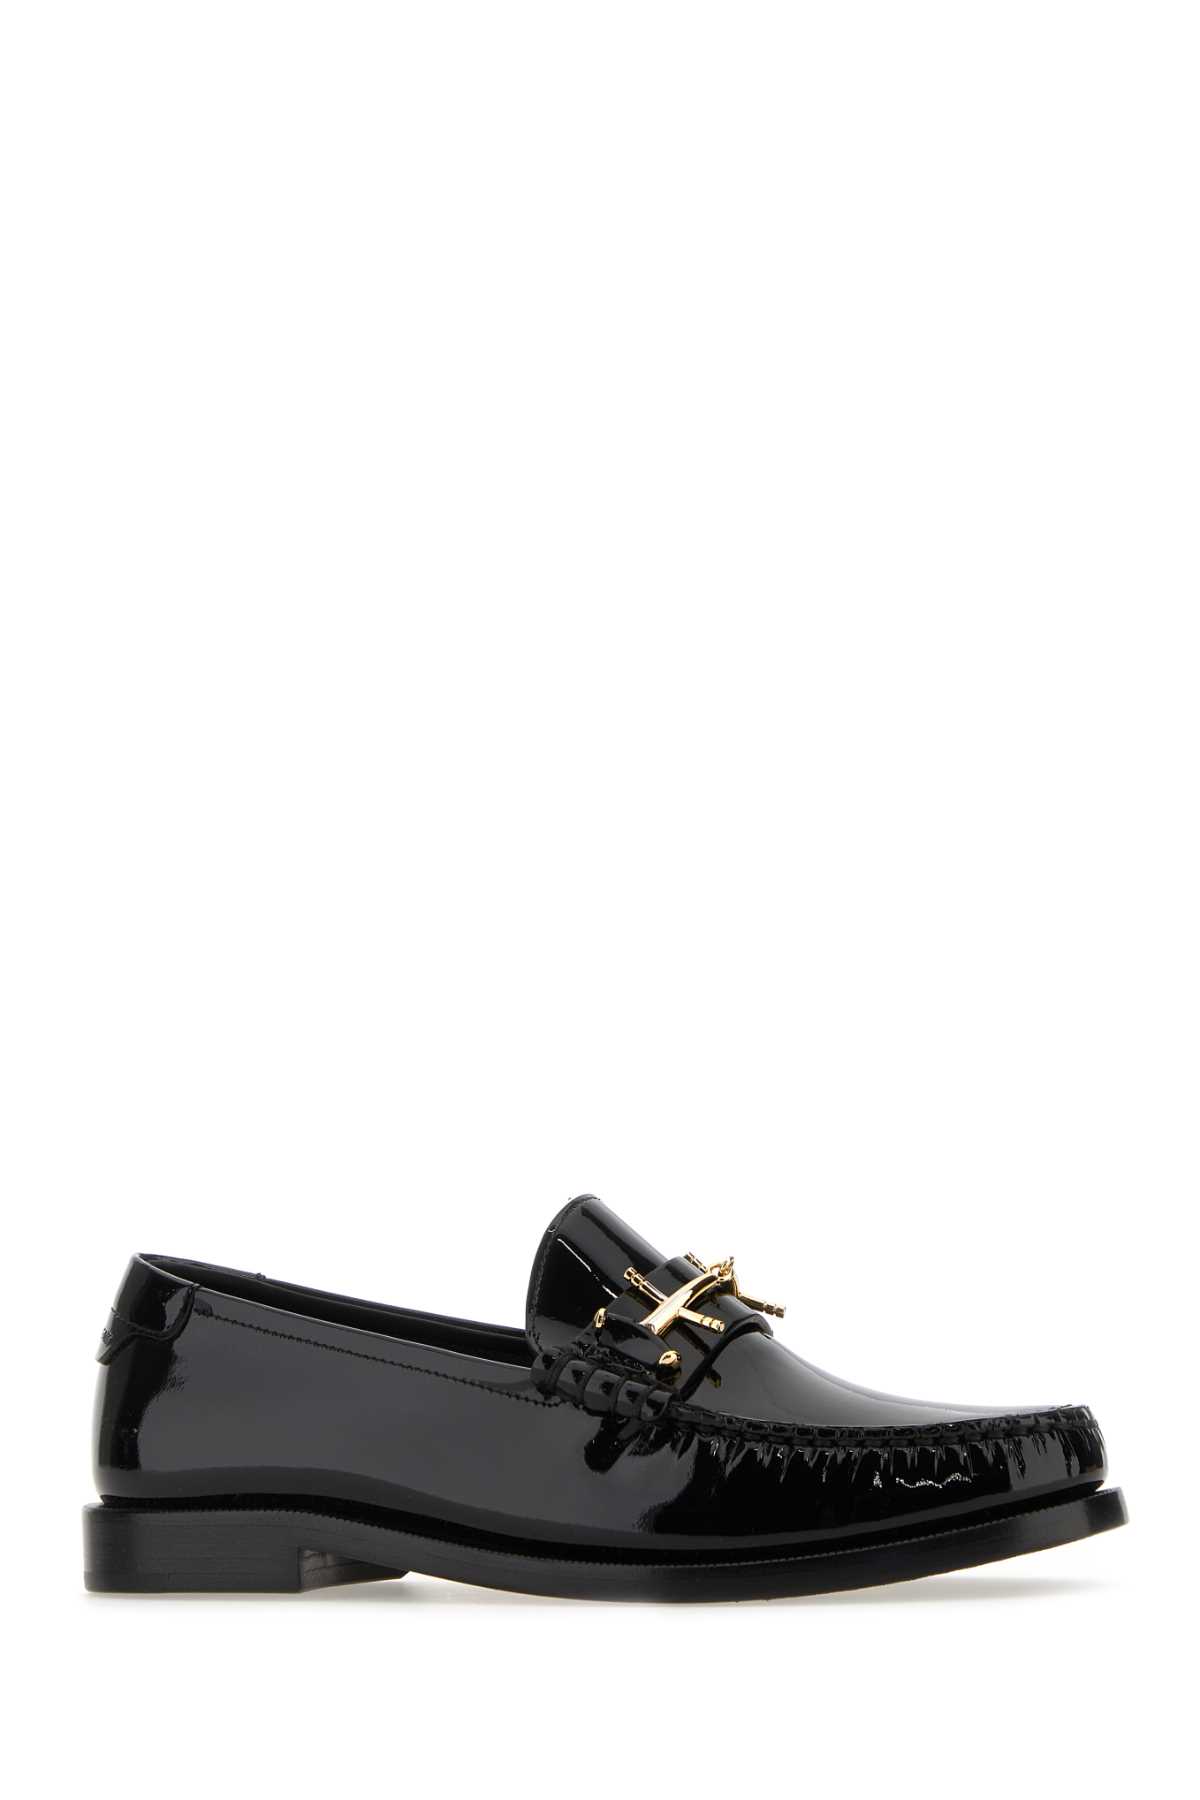 SAINT LAURENT BLACK LEATHER LE LOAFERS LOAFERS